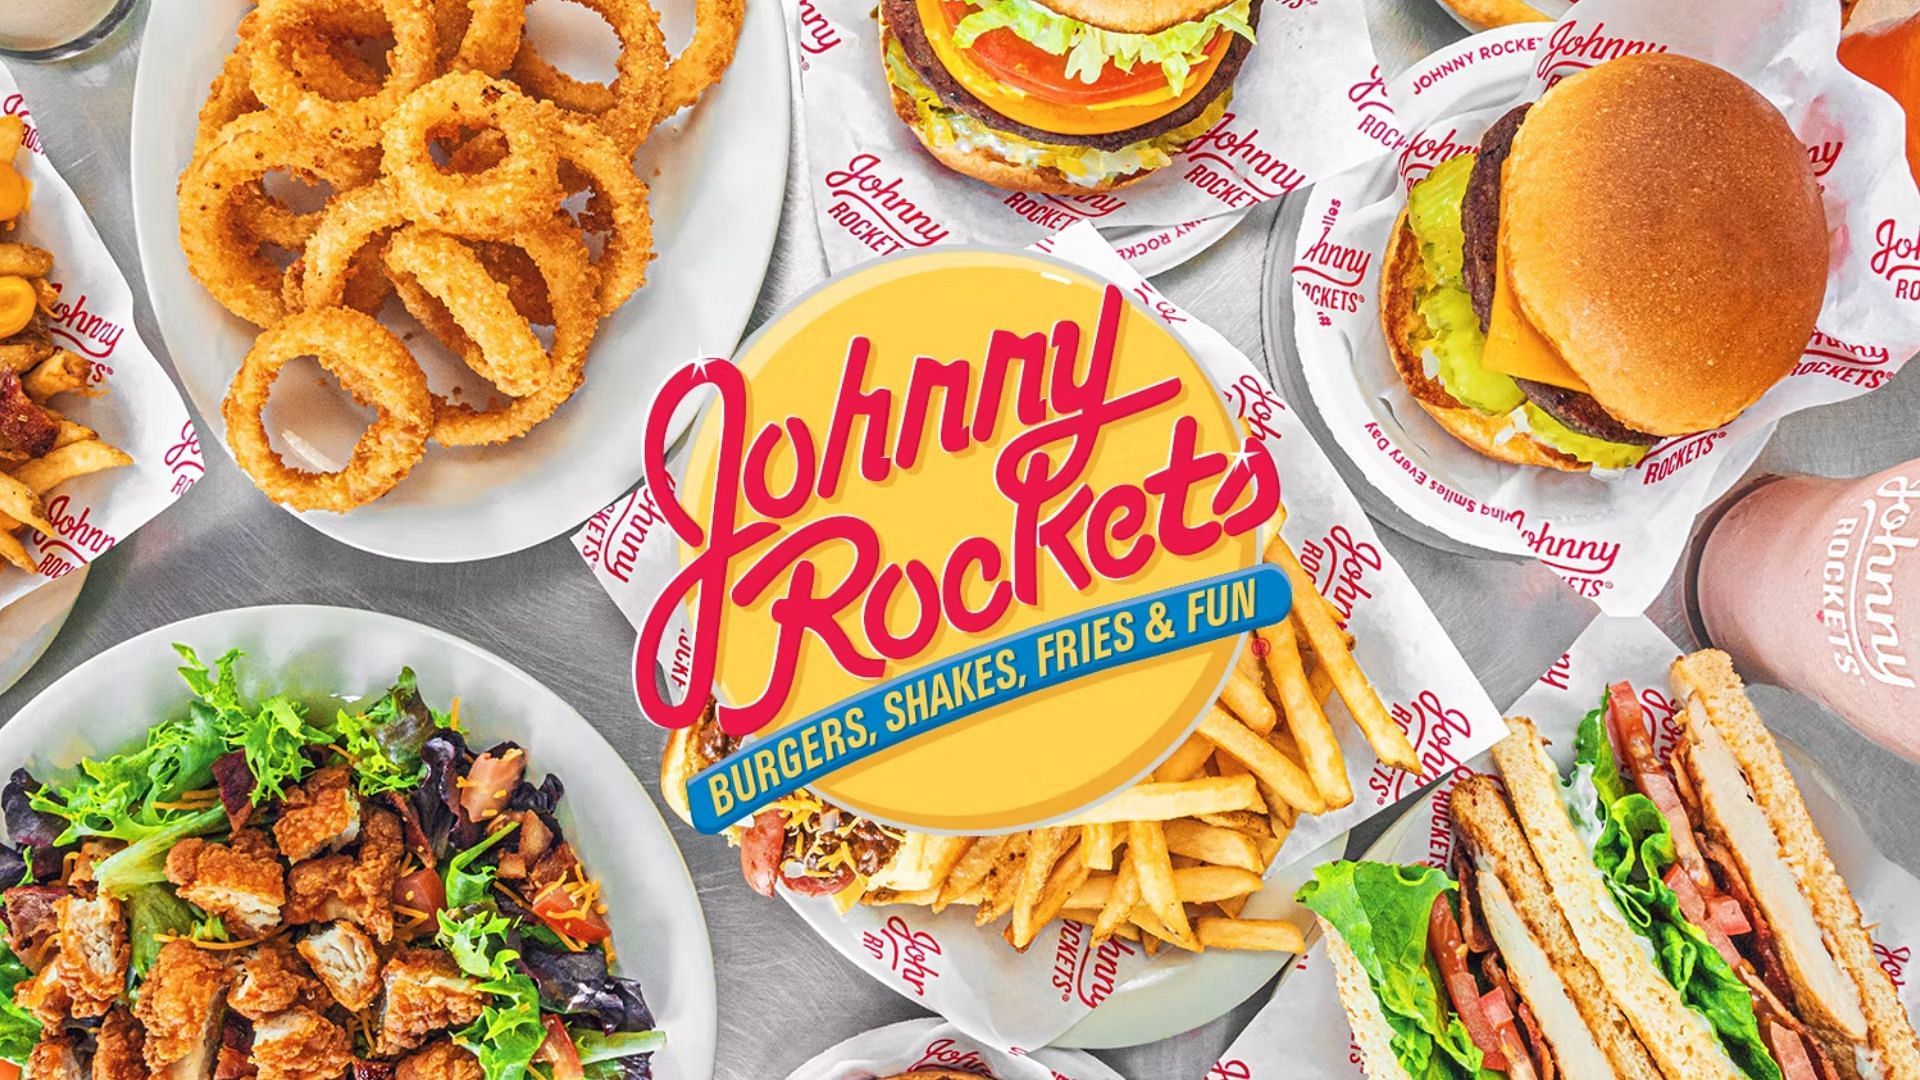 Johnny Rockets partners with Eggos for a new Eggos Chicken and Waffle Sandwich (Image via Johnny Rockets)